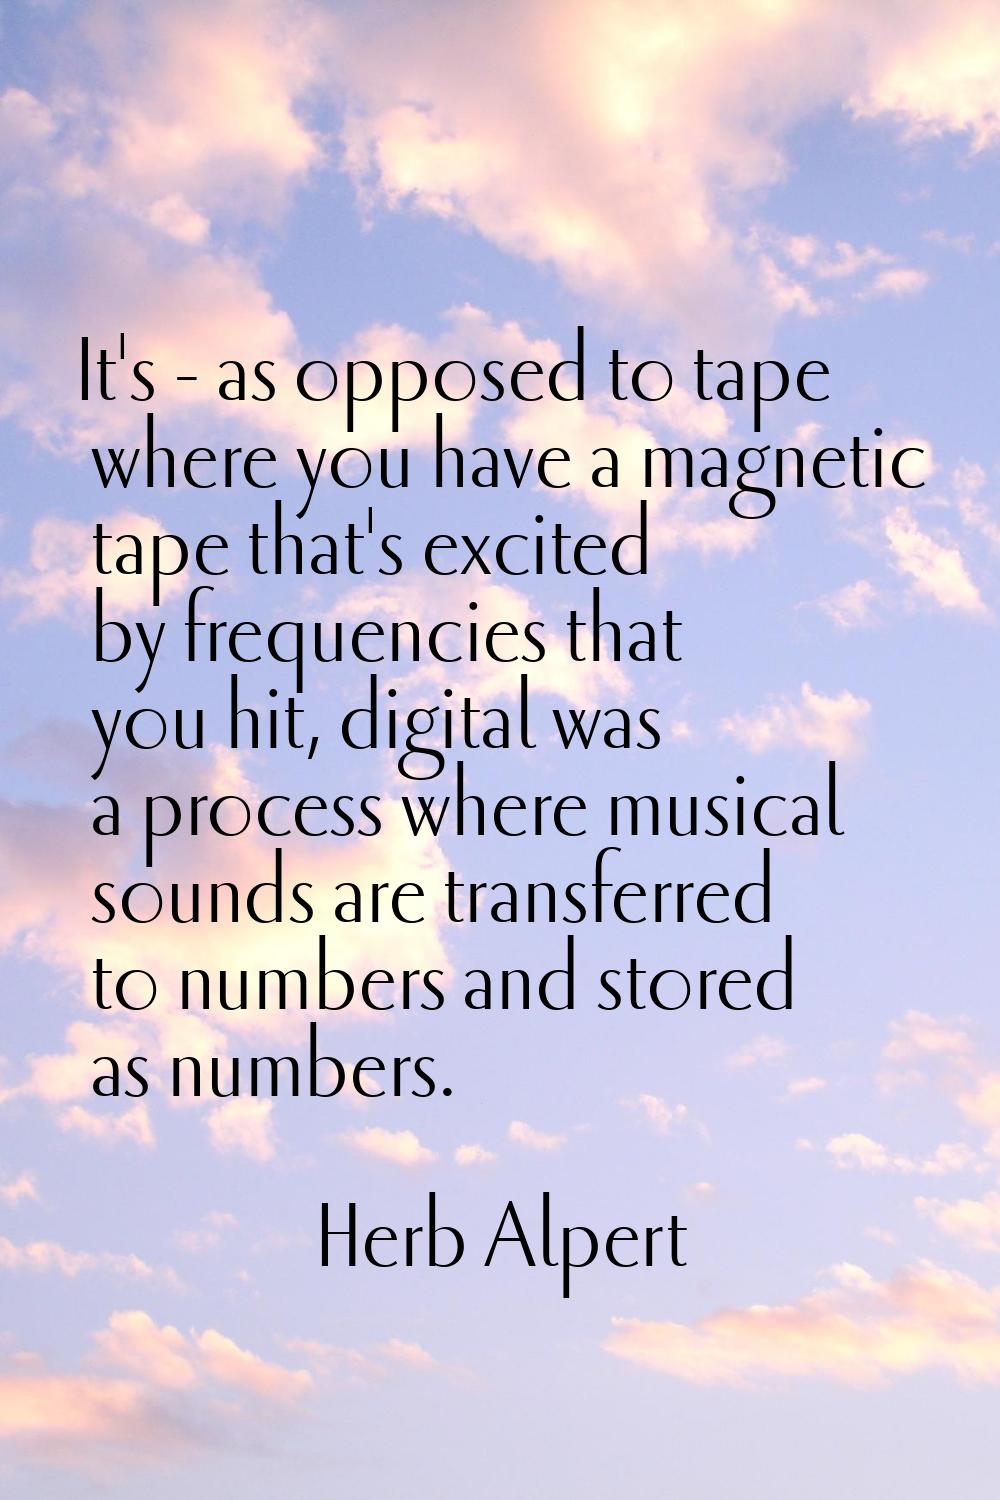 It's - as opposed to tape where you have a magnetic tape that's excited by frequencies that you hit